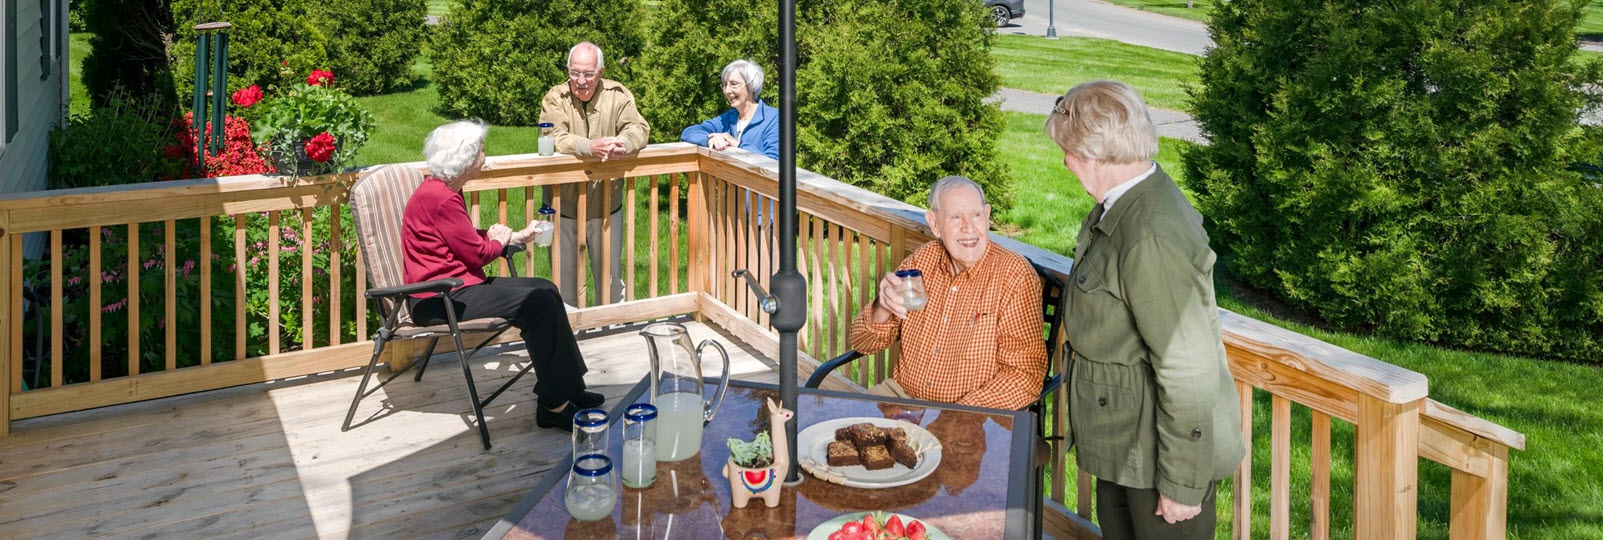 residents entertaining friends on their deck